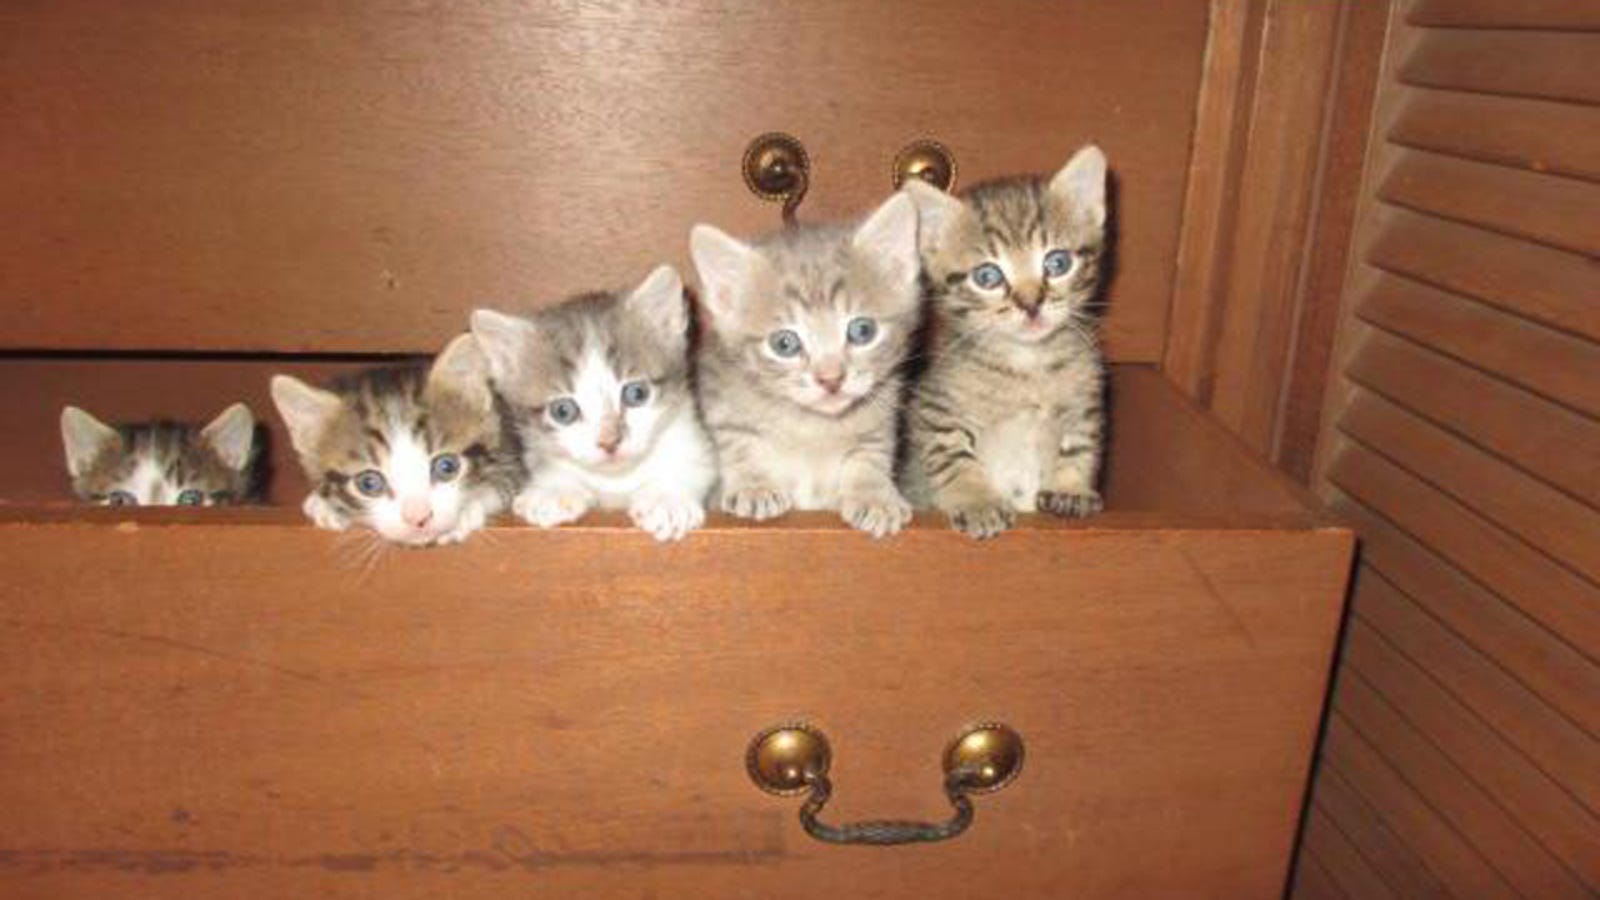 Kittens in a Drawer, Organized by Height for Your Convenience